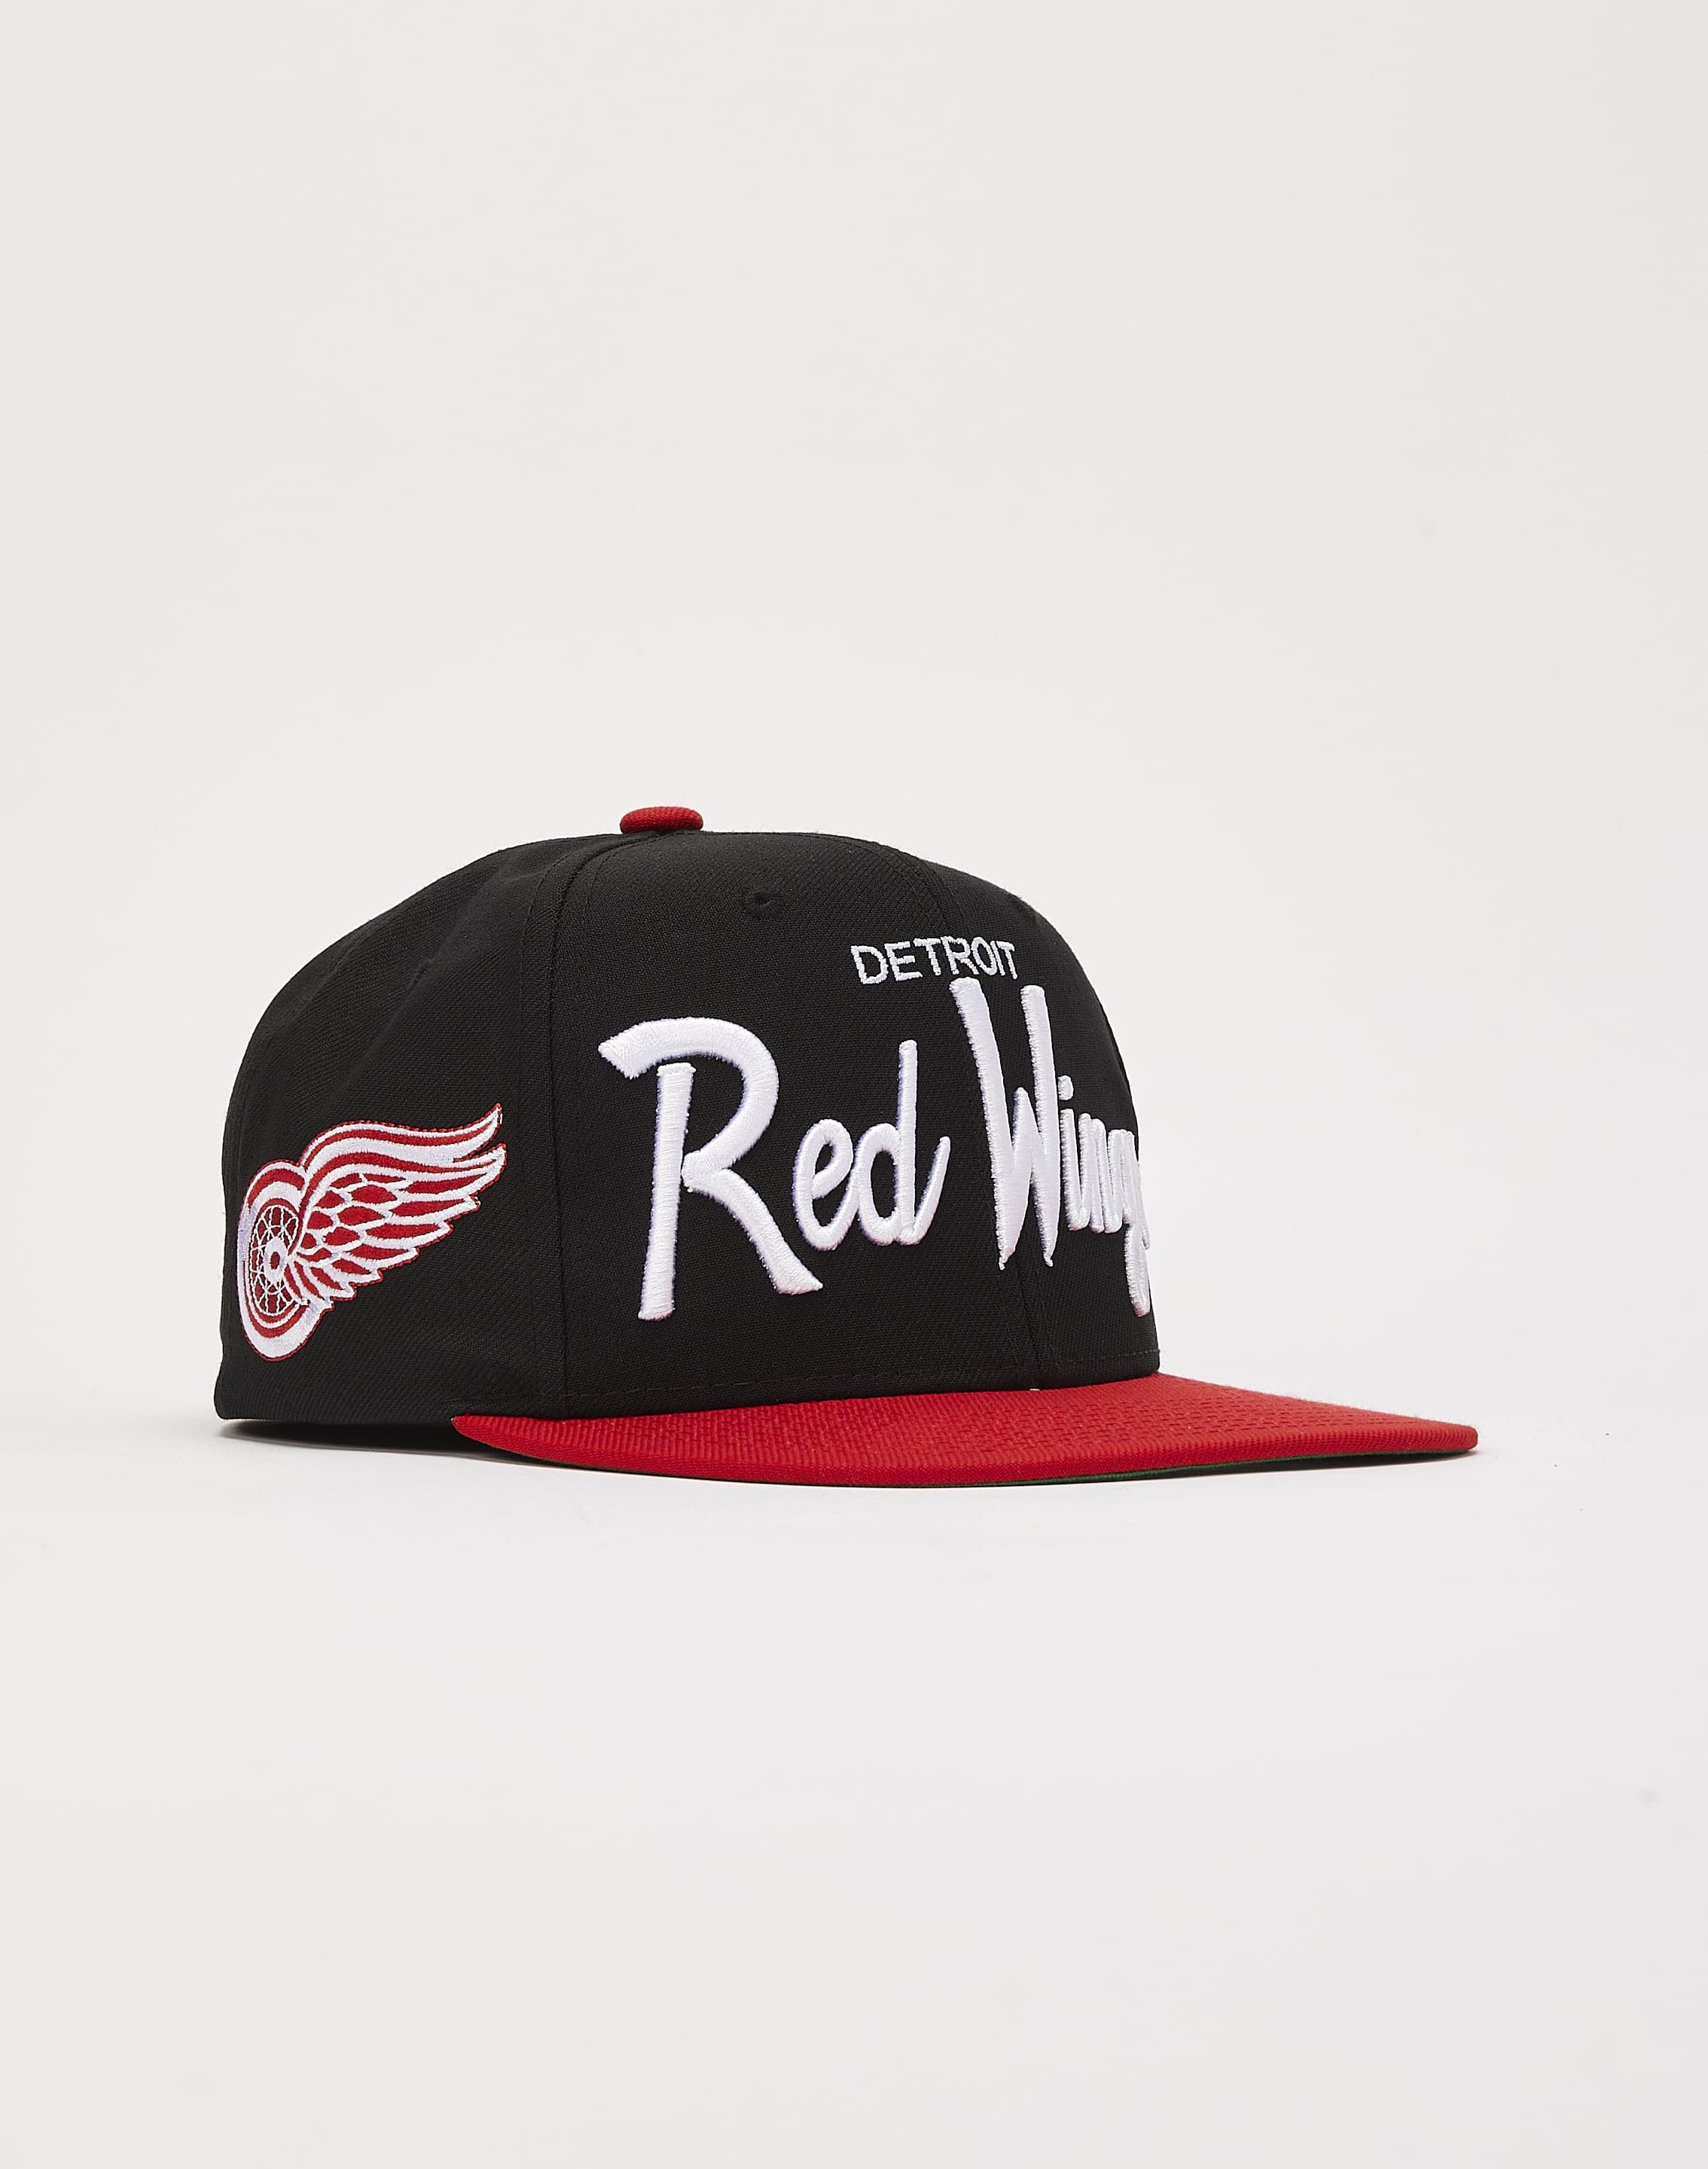 Men's Detroit Red Wings Mitchell & Ness Black Double Trouble Lightning Snapback  Hat